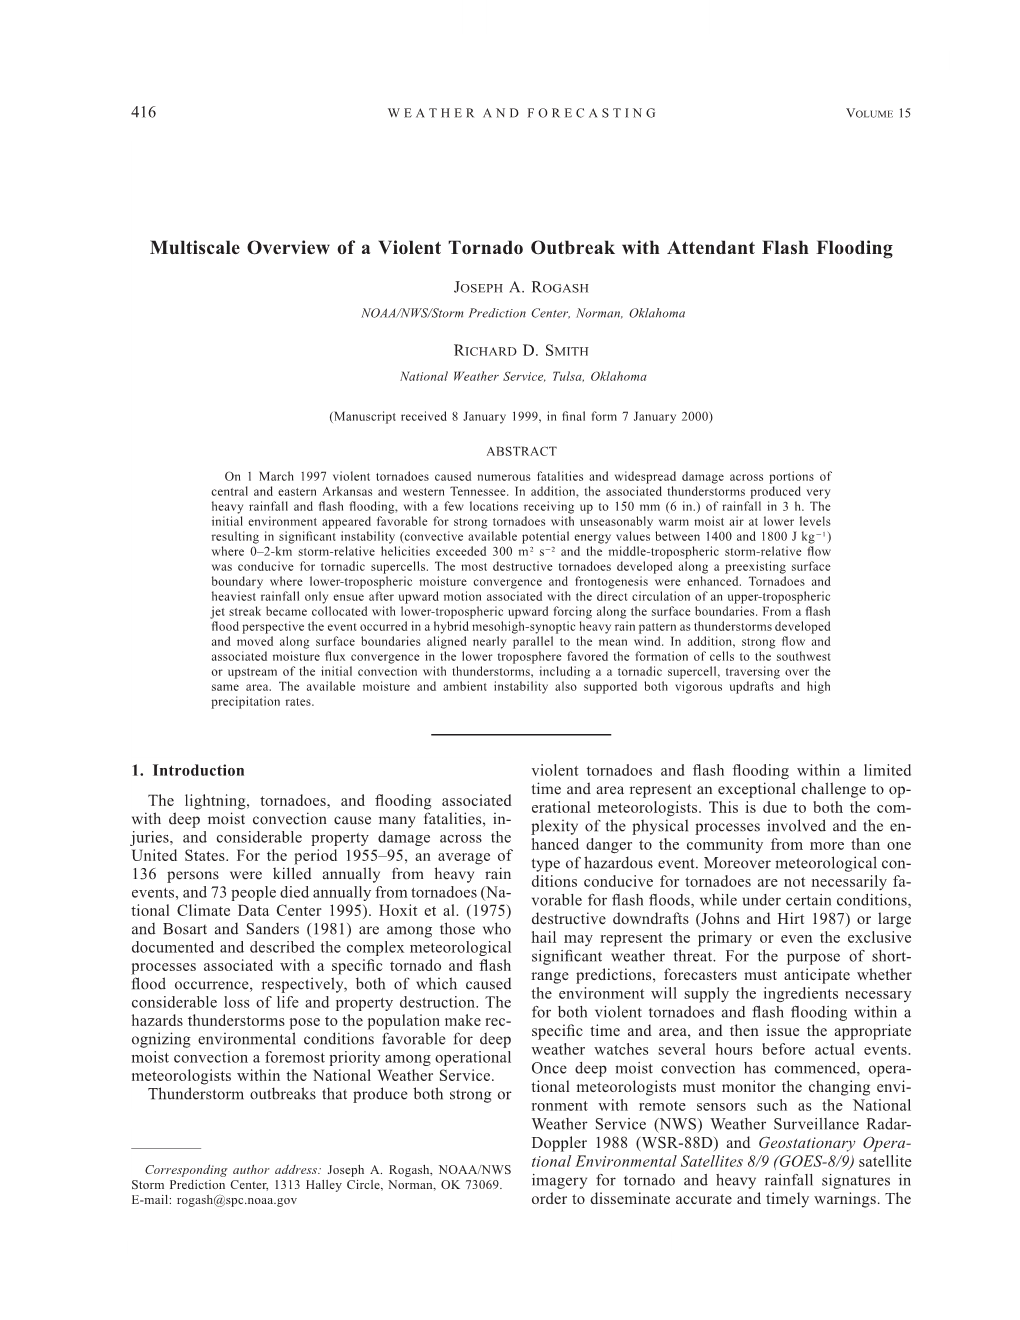 Multiscale Overview of a Violent Tornado Outbreak with Attendant Flash Flooding